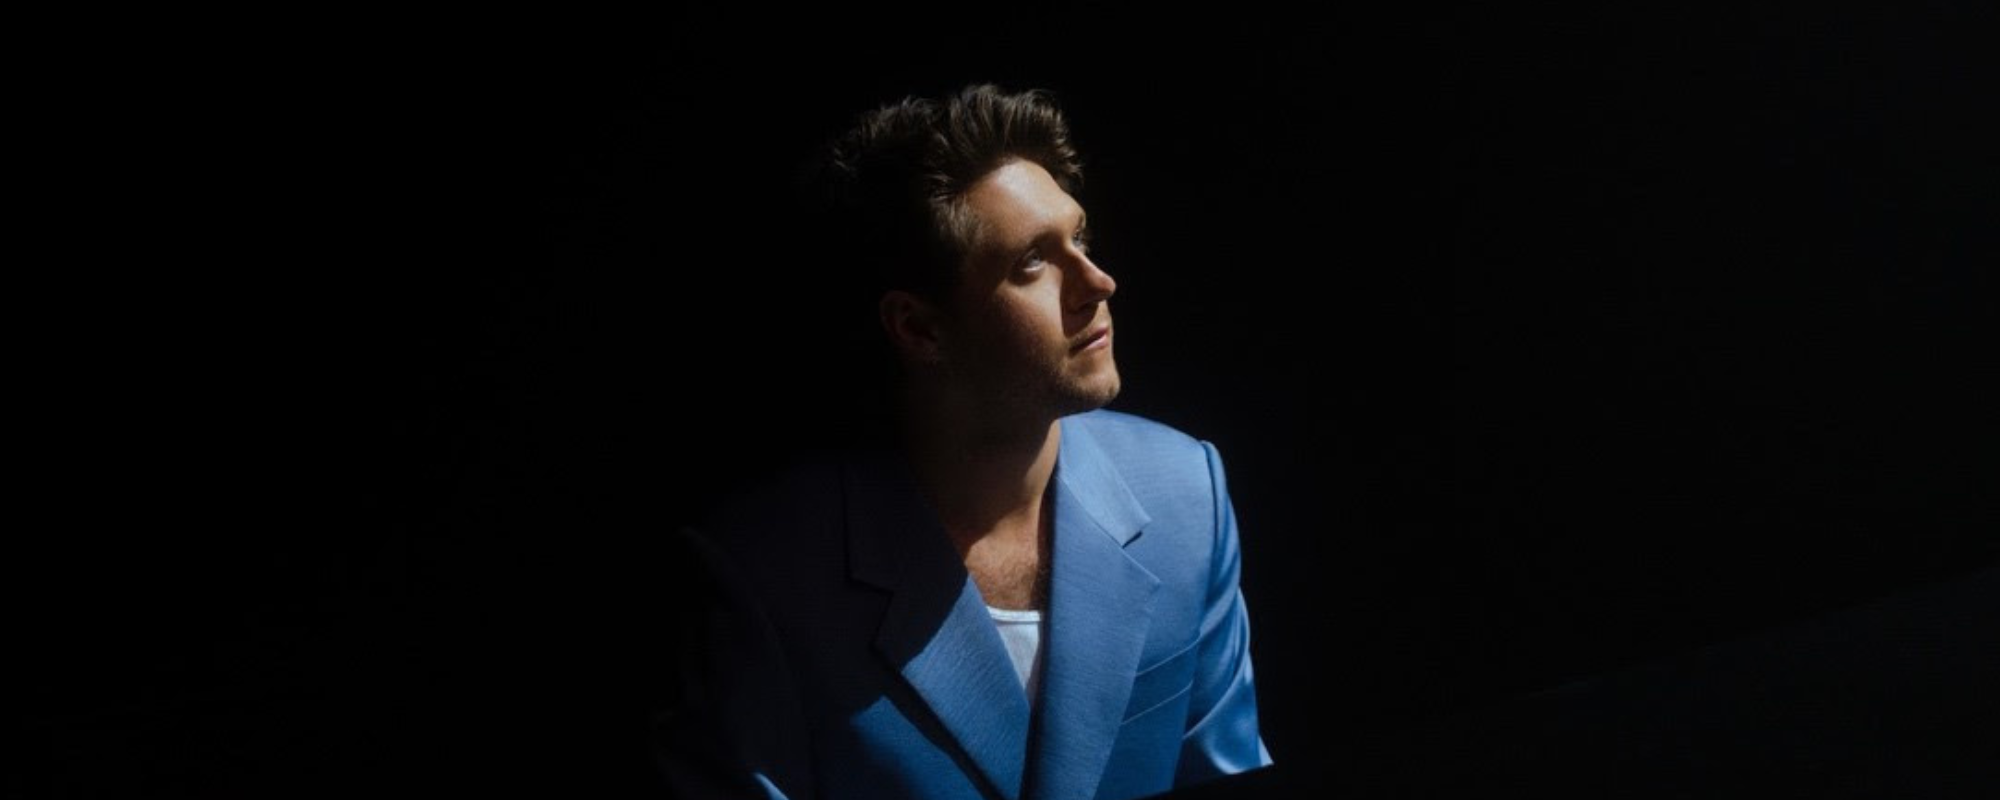 Review: Niall Horan Shares New Stunning Version of “You Could Start a Cult” with Lizzy McAlpine